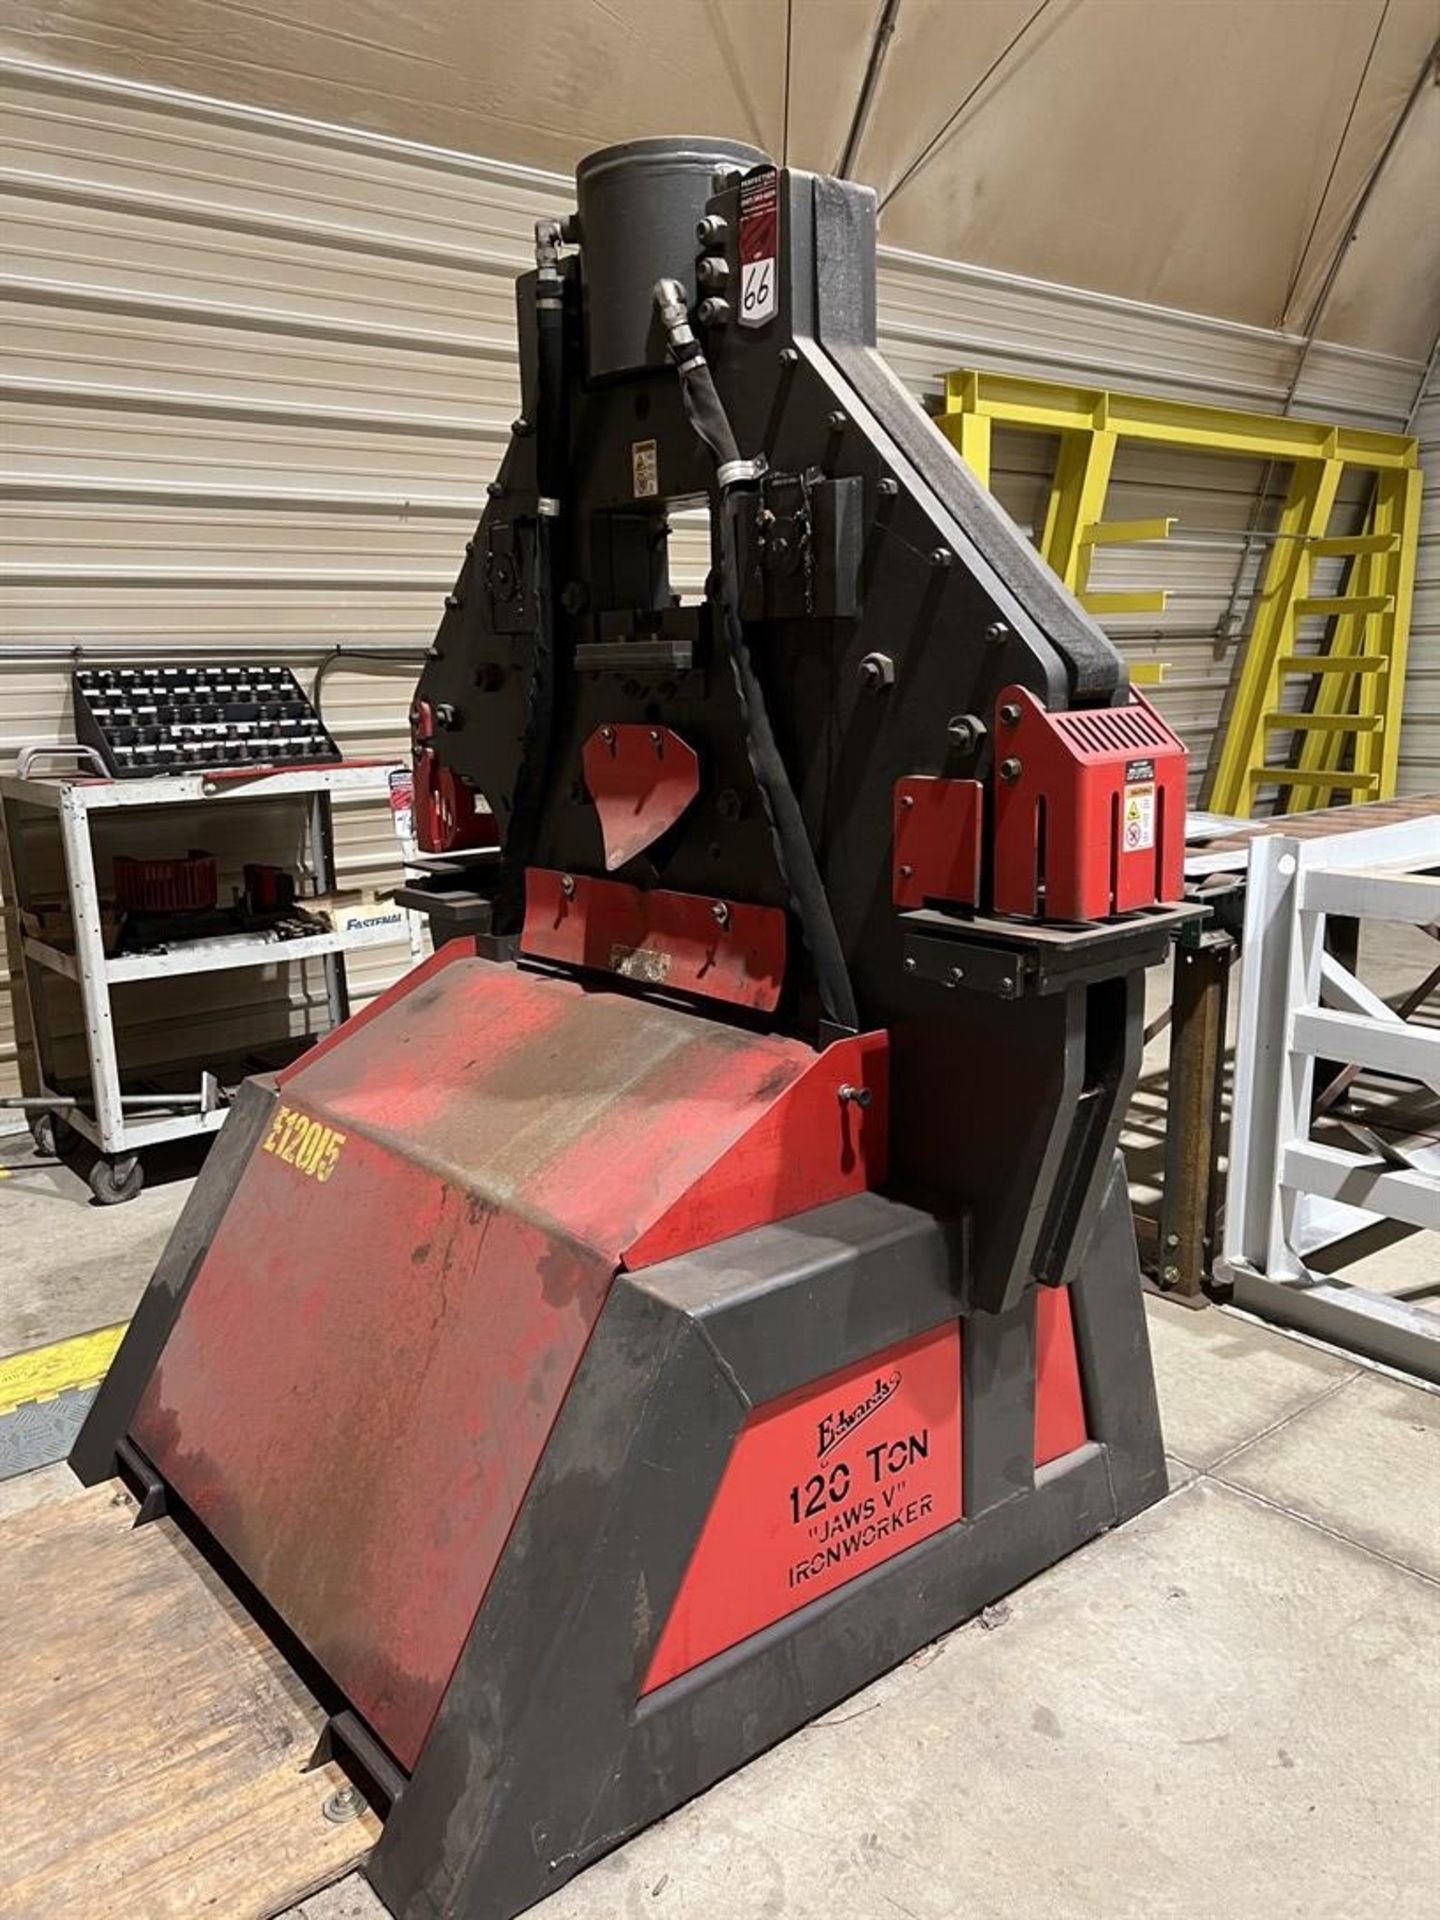 2015 EDWARDS 120 Ton Ironworker, s/n 030715IW120, 1-1/2” Dia in 1” A36 Punch Max Capacity, 2-1/2” - Image 9 of 17